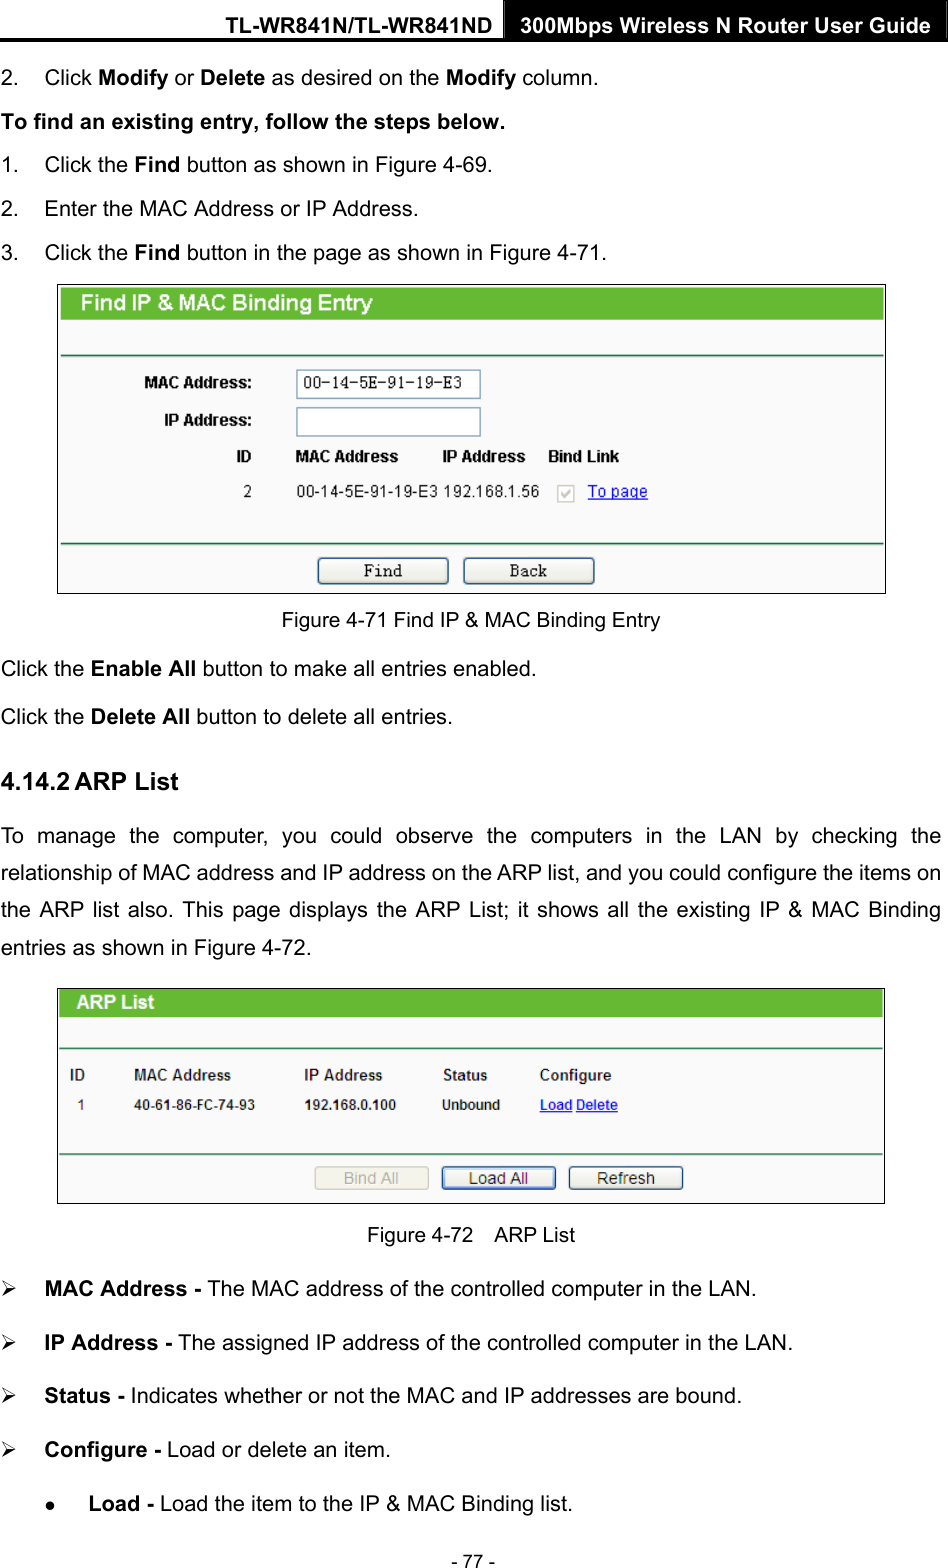 TL-WR841N/TL-WR841ND 300Mbps Wireless N Router User Guide - 77 - 2. Click Modify or Delete as desired on the Modify column.   To find an existing entry, follow the steps below. 1. Click the Find button as shown in Figure 4-69. 2.  Enter the MAC Address or IP Address. 3. Click the Find button in the page as shown in Figure 4-71.  Figure 4-71 Find IP &amp; MAC Binding Entry Click the Enable All button to make all entries enabled. Click the Delete All button to delete all entries. 4.14.2 ARP List To manage the computer, you could observe the computers in the LAN by checking the relationship of MAC address and IP address on the ARP list, and you could configure the items on the ARP list also. This page displays the ARP List; it shows all the existing IP &amp; MAC Binding entries as shown in Figure 4-72.    Figure 4-72  ARP List ¾ MAC Address - The MAC address of the controlled computer in the LAN.   ¾ IP Address - The assigned IP address of the controlled computer in the LAN.   ¾ Status - Indicates whether or not the MAC and IP addresses are bound. ¾ Configure - Load or delete an item.   z Load - Load the item to the IP &amp; MAC Binding list.   